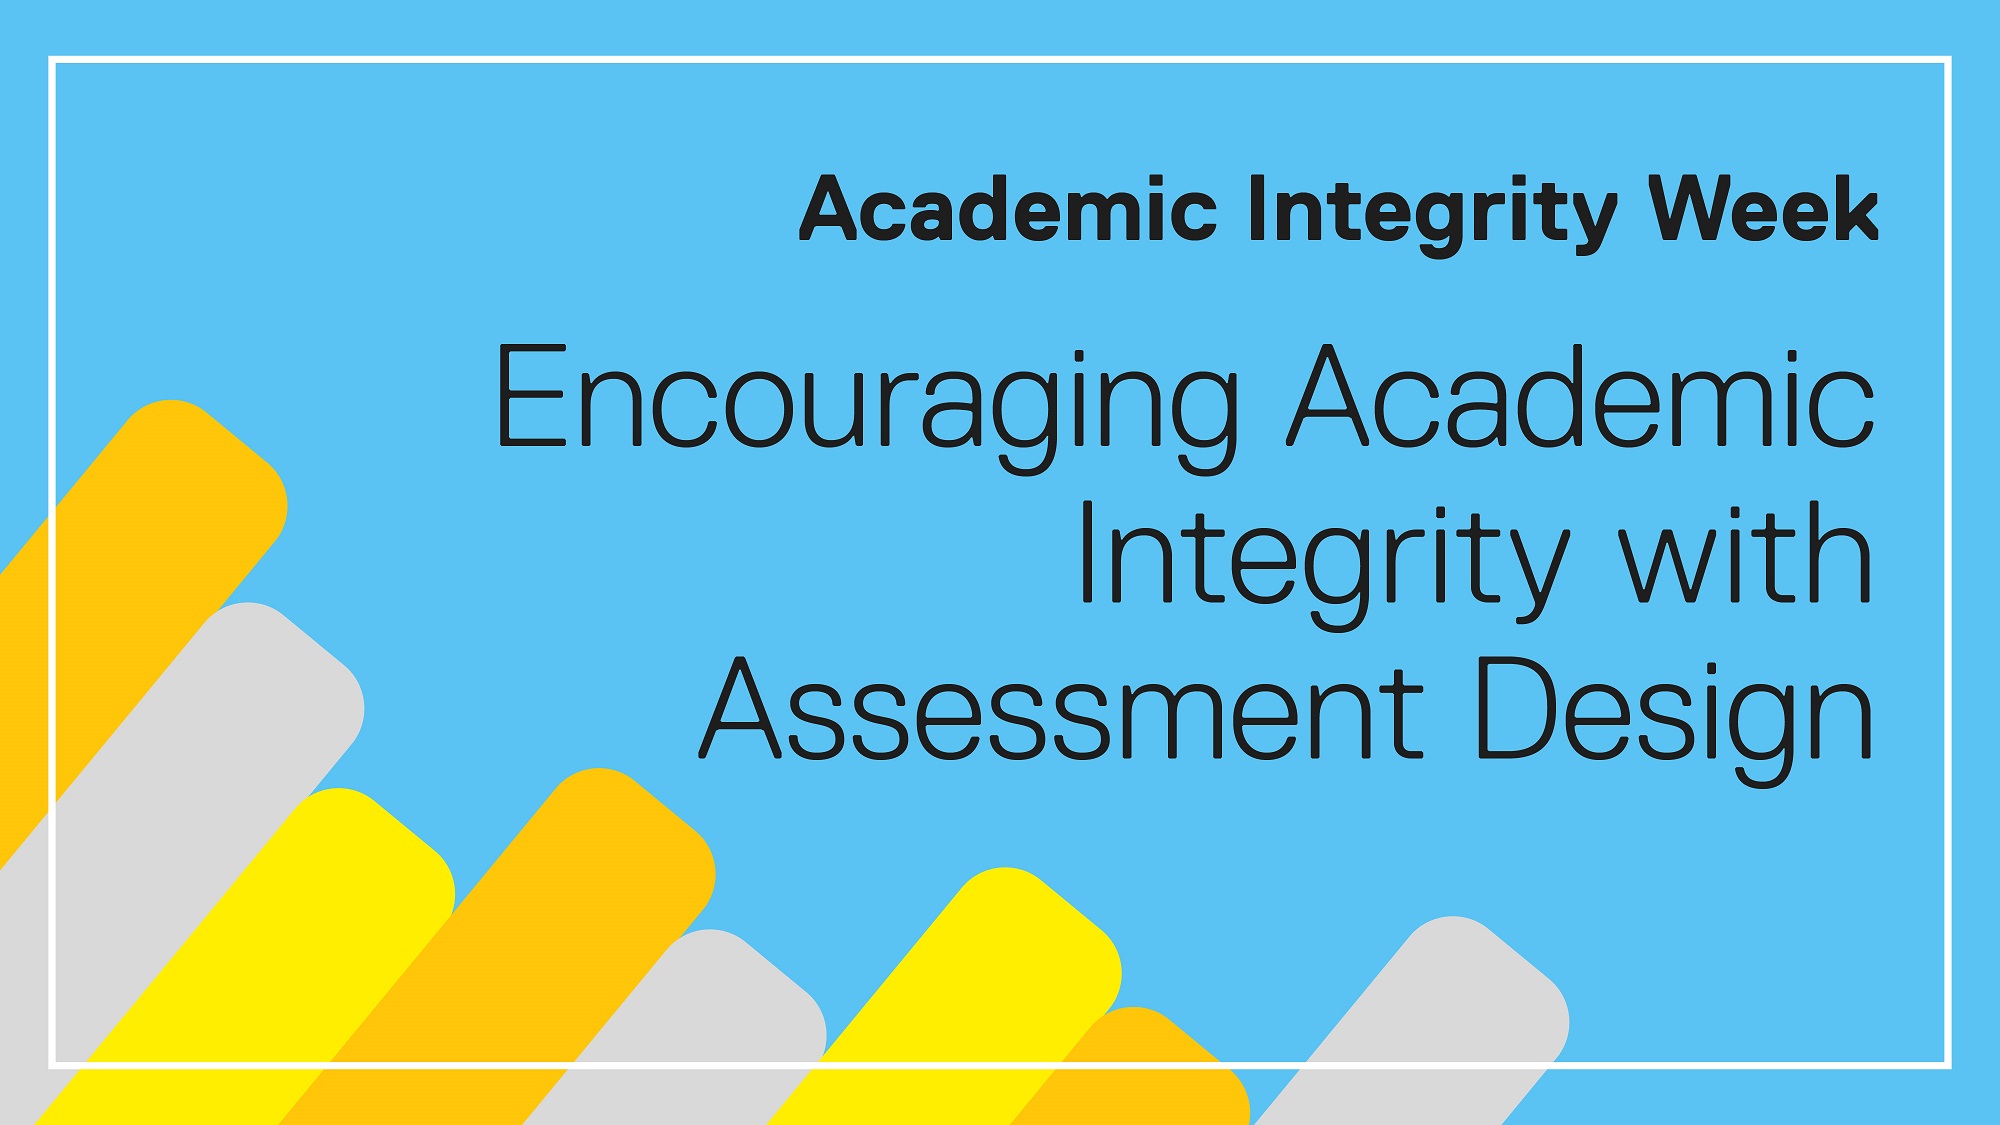 Academic Integrity Week: Encouraging Academic Integrity with Assessment Design